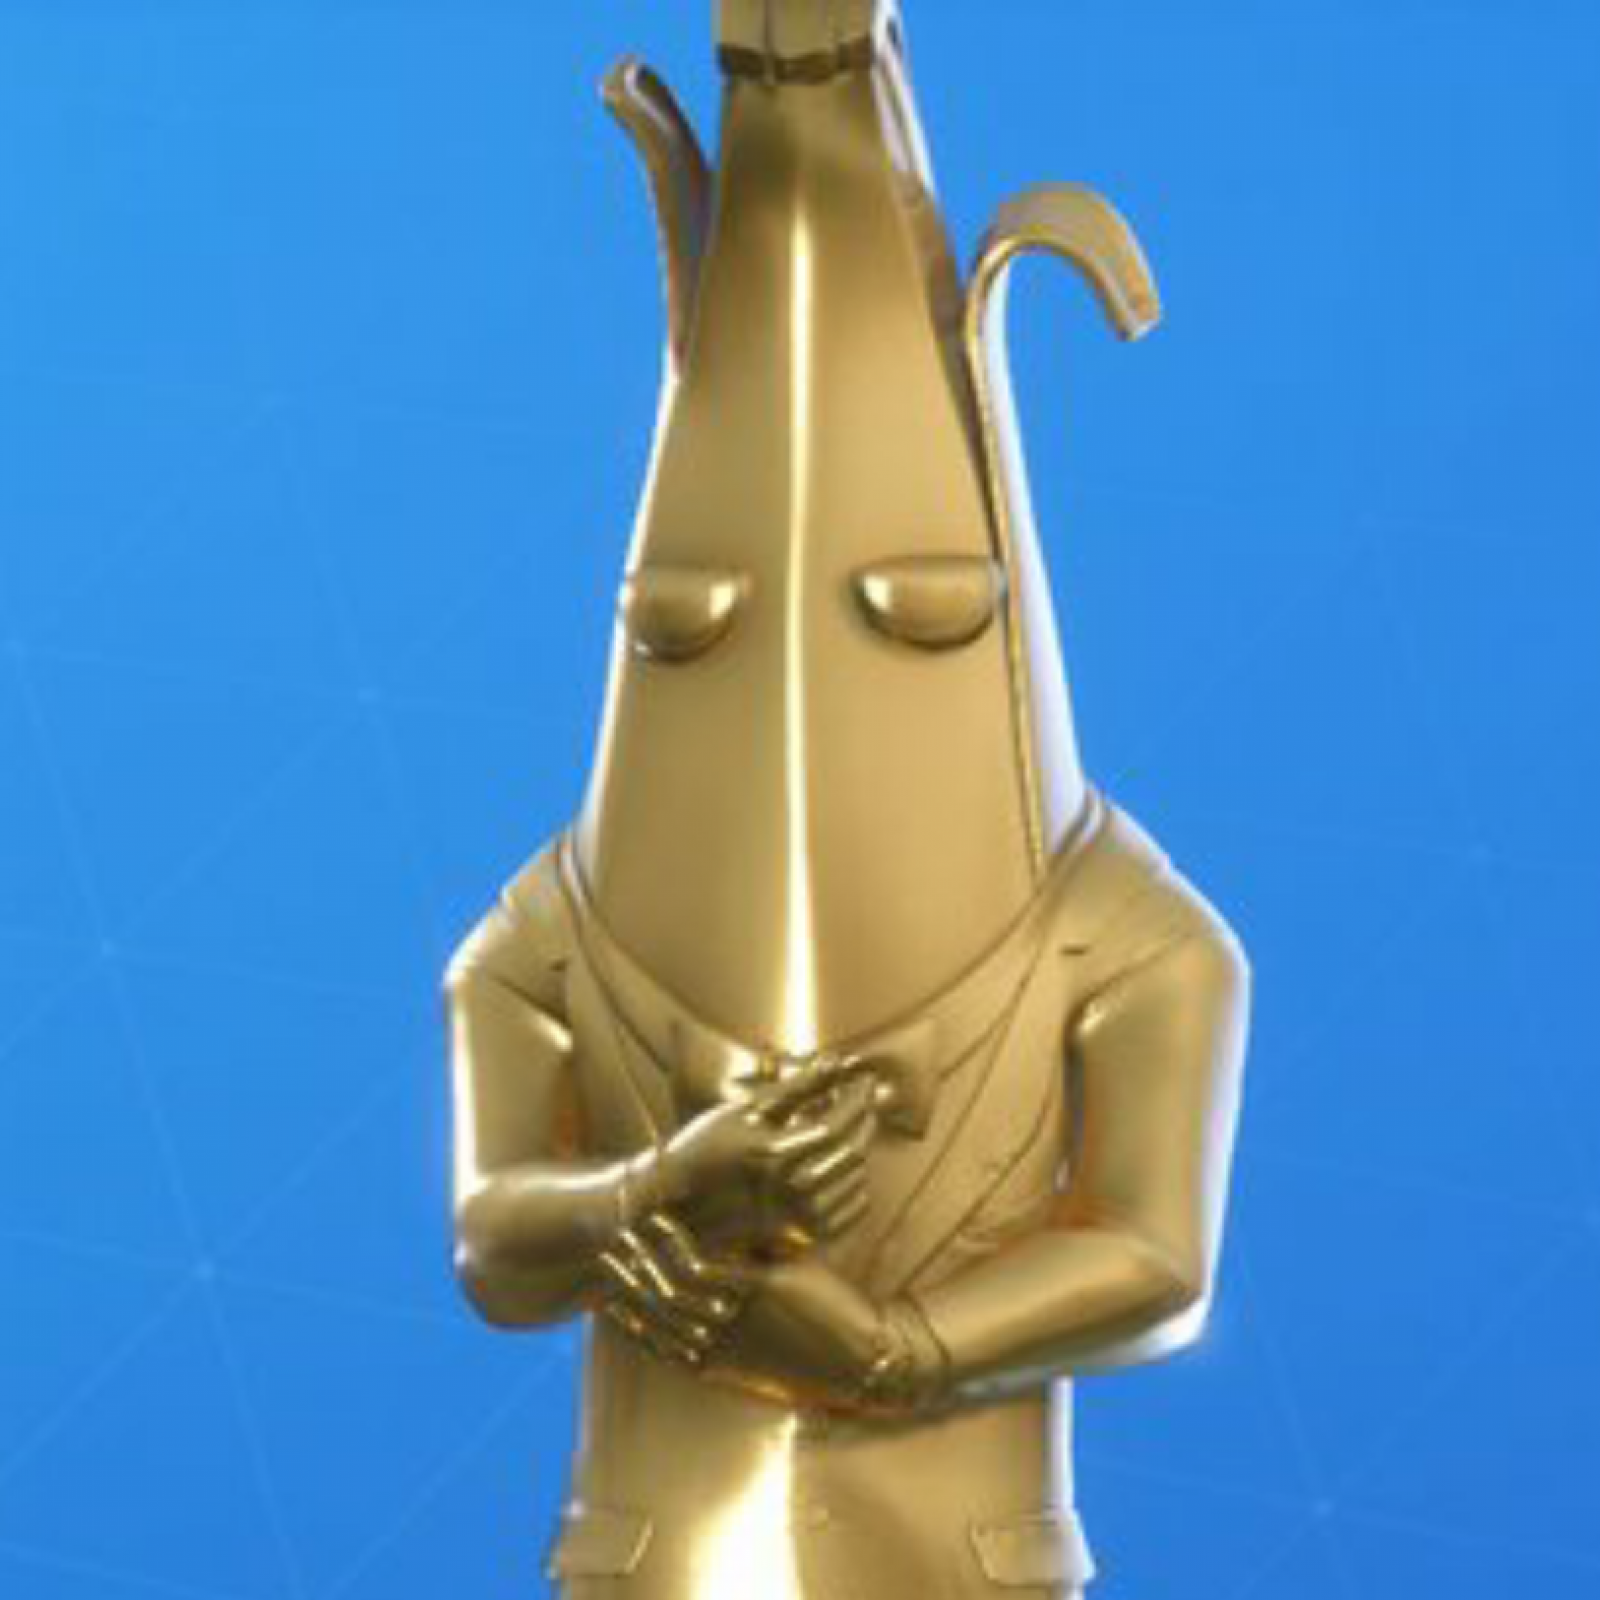 håndled Bøde Veluddannet What Is the Rarest 'Fortnite' Skin? These Cosmetics Are the Most Valuable